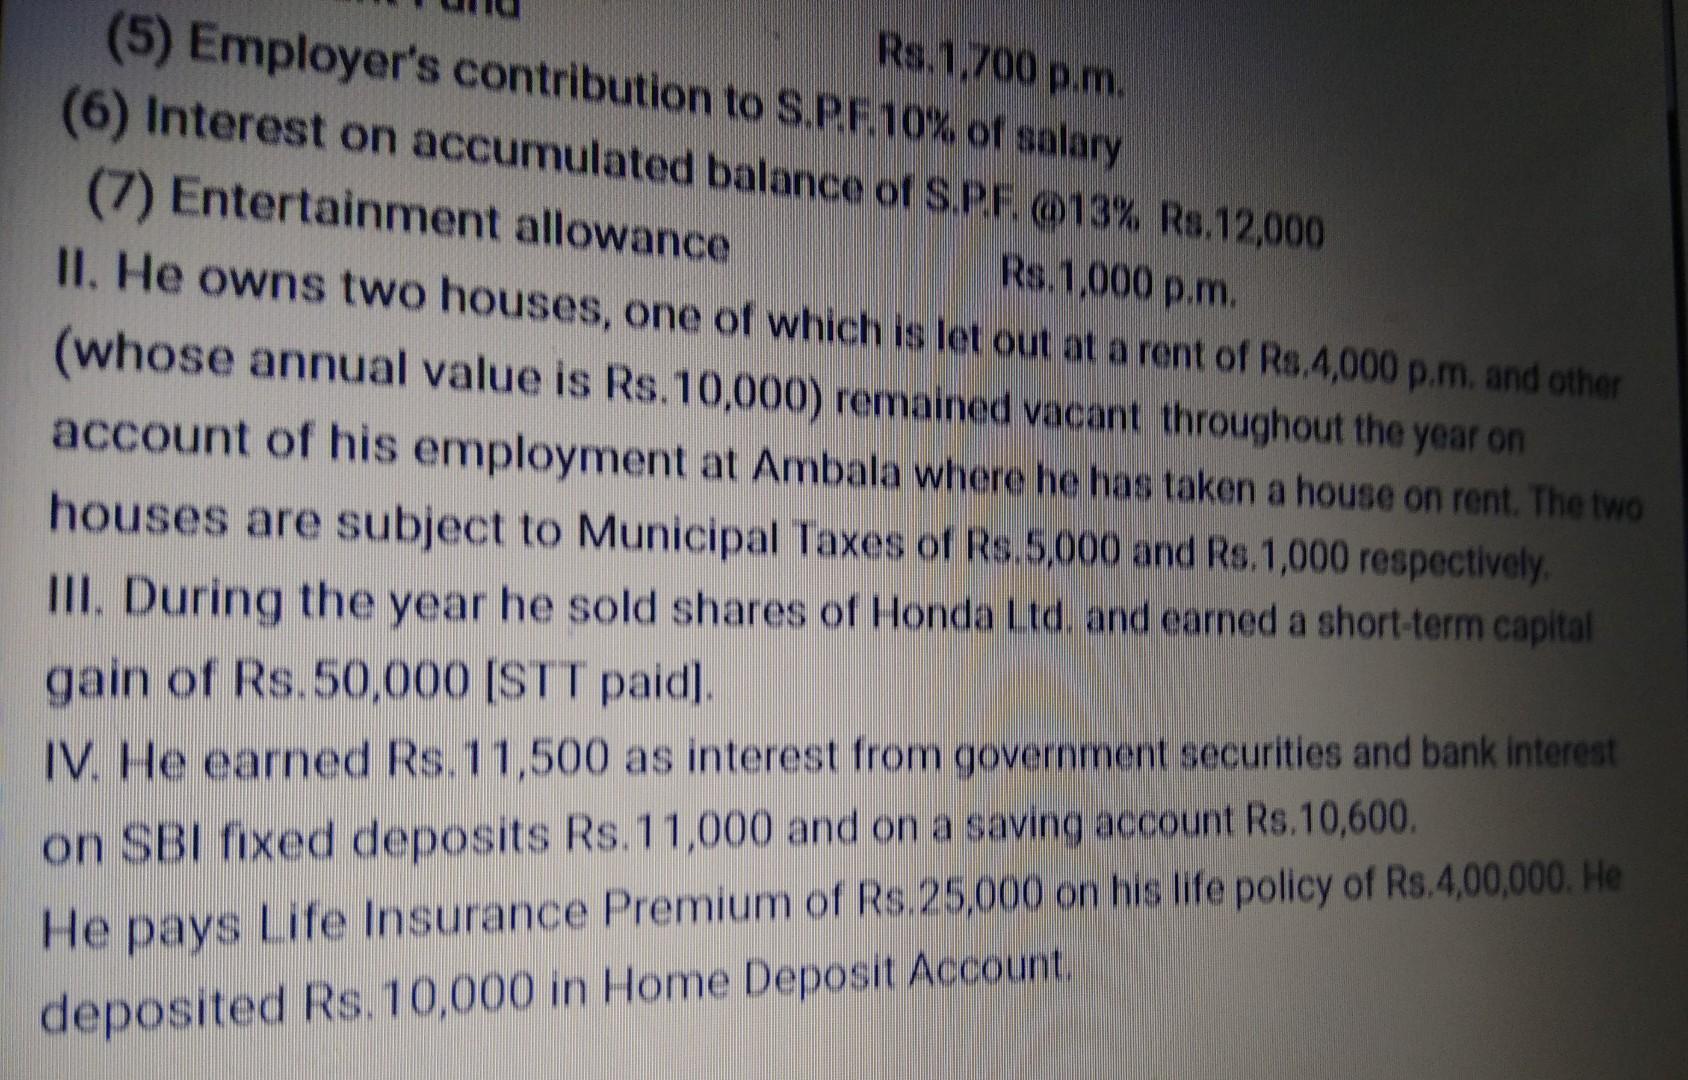 Rs.1.700 p.m. (5) Employer's contribution to S.P.F.10% of salary (6) Interest on accumulated balance of